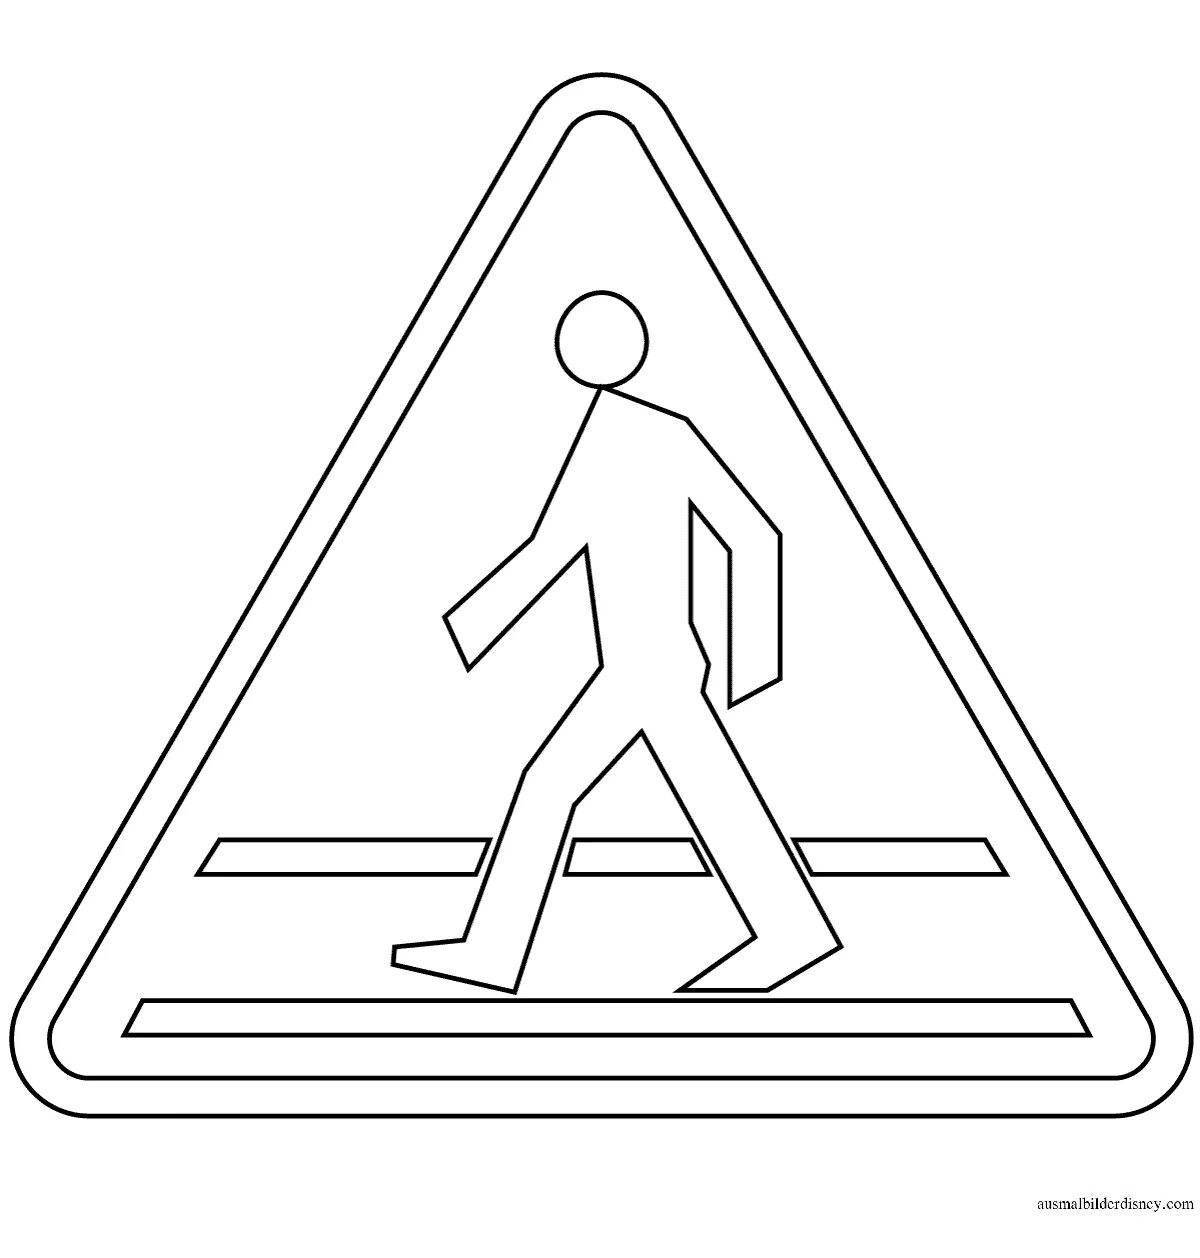 Coloring rich pedestrian signs